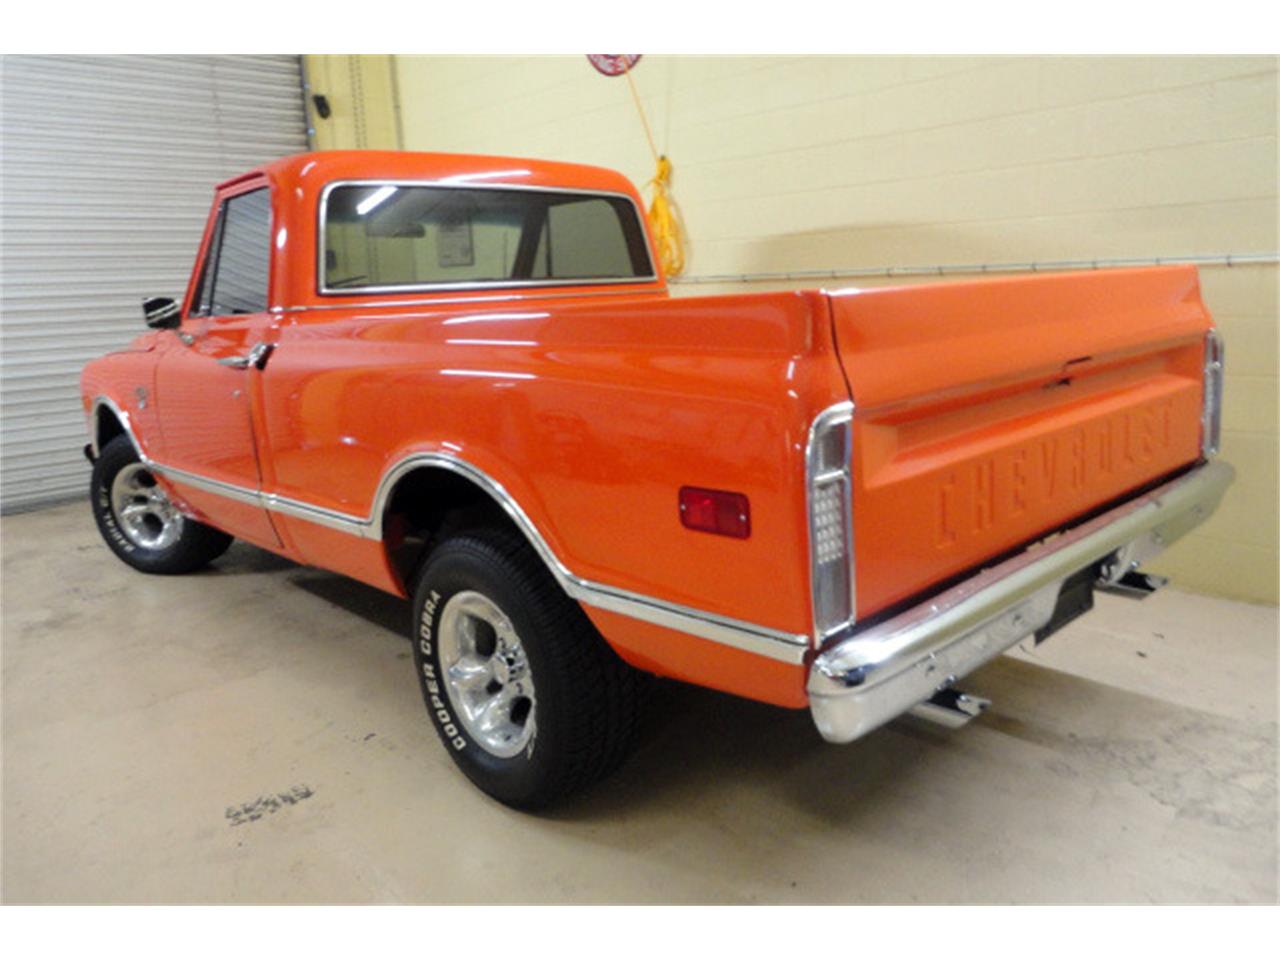 For Sale at Auction: 1968 Chevrolet C10 for sale in West Palm Beach, FL